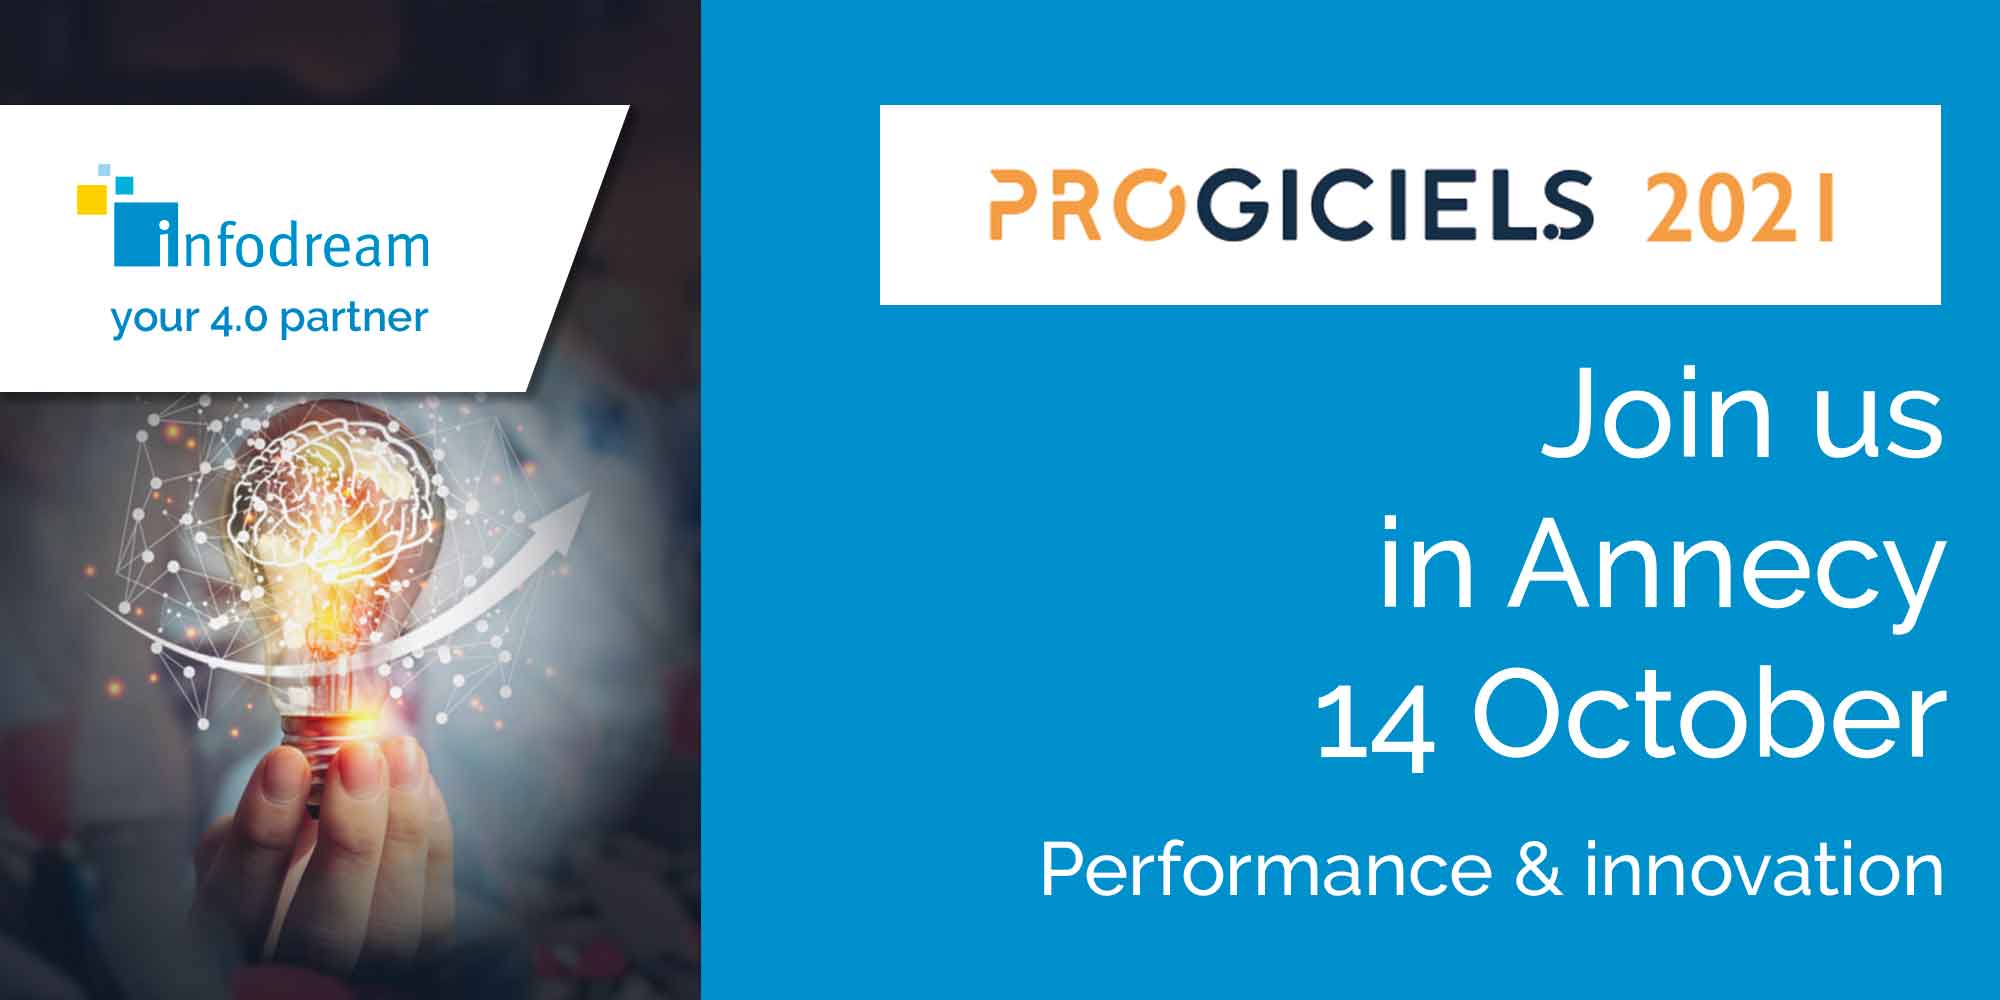 Infodream At Progiciels, The Software Exhibition For Industrial Performance And Innovation